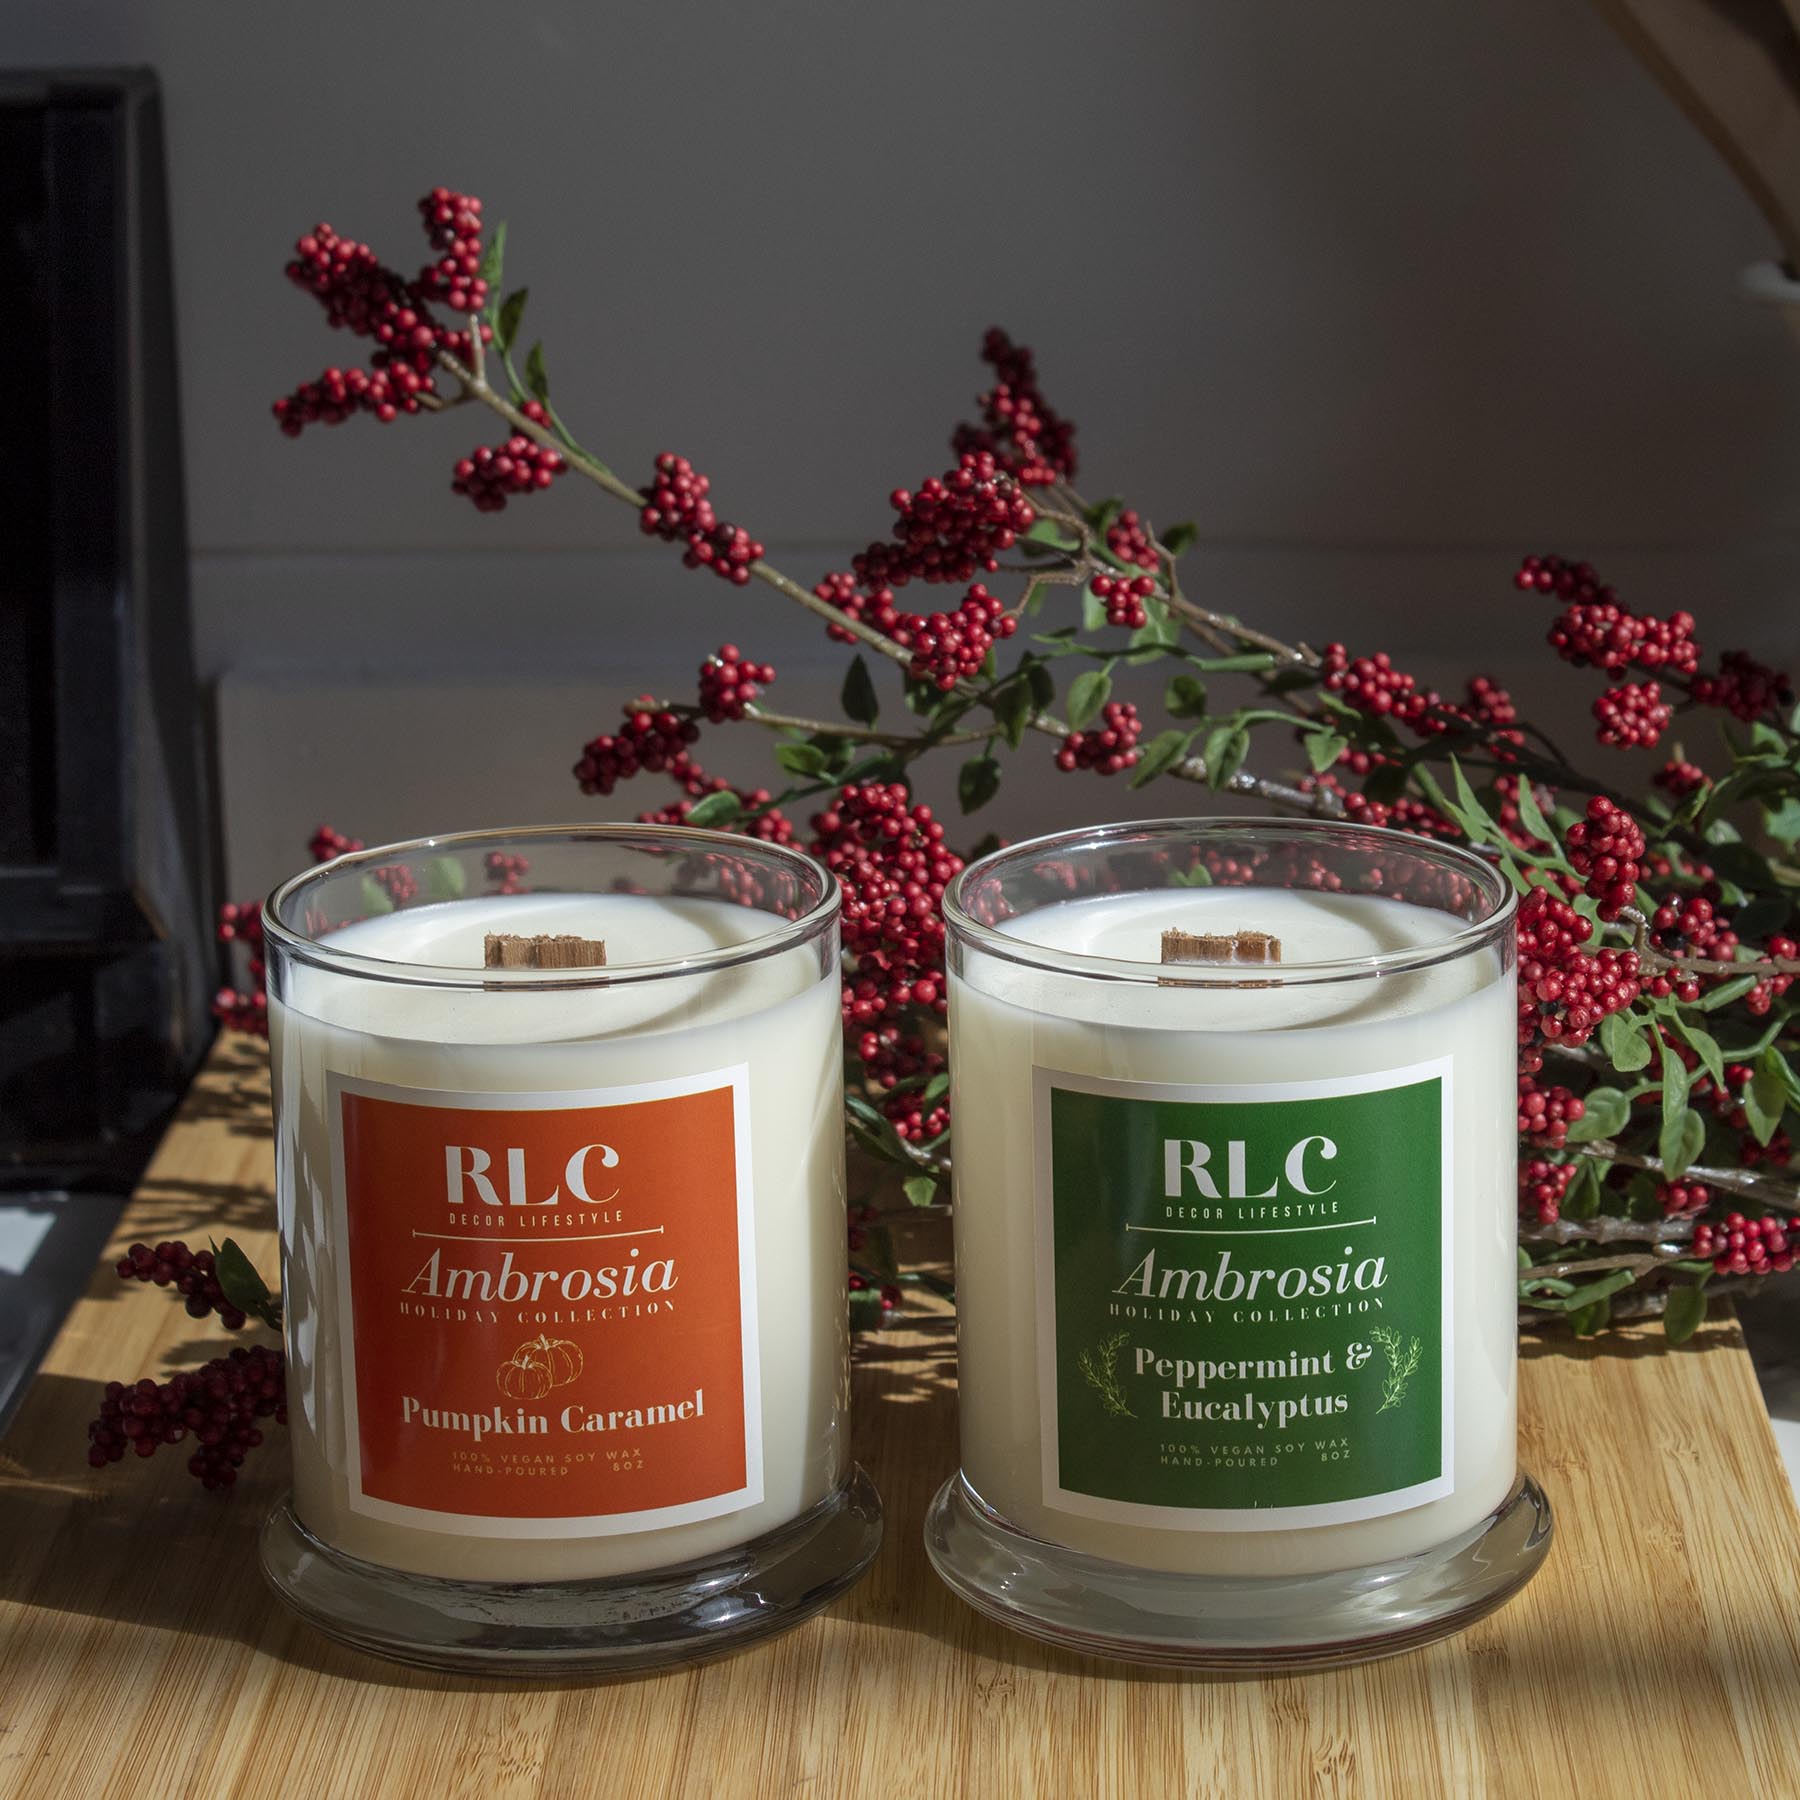 Candle lovers who love Pumpkin Caramel & Peppermint Eucalyptus scented candles will love this duo gift box set. This is a great holiday gift for gift-givers who are on the go! – RLC Decor Lifestyle